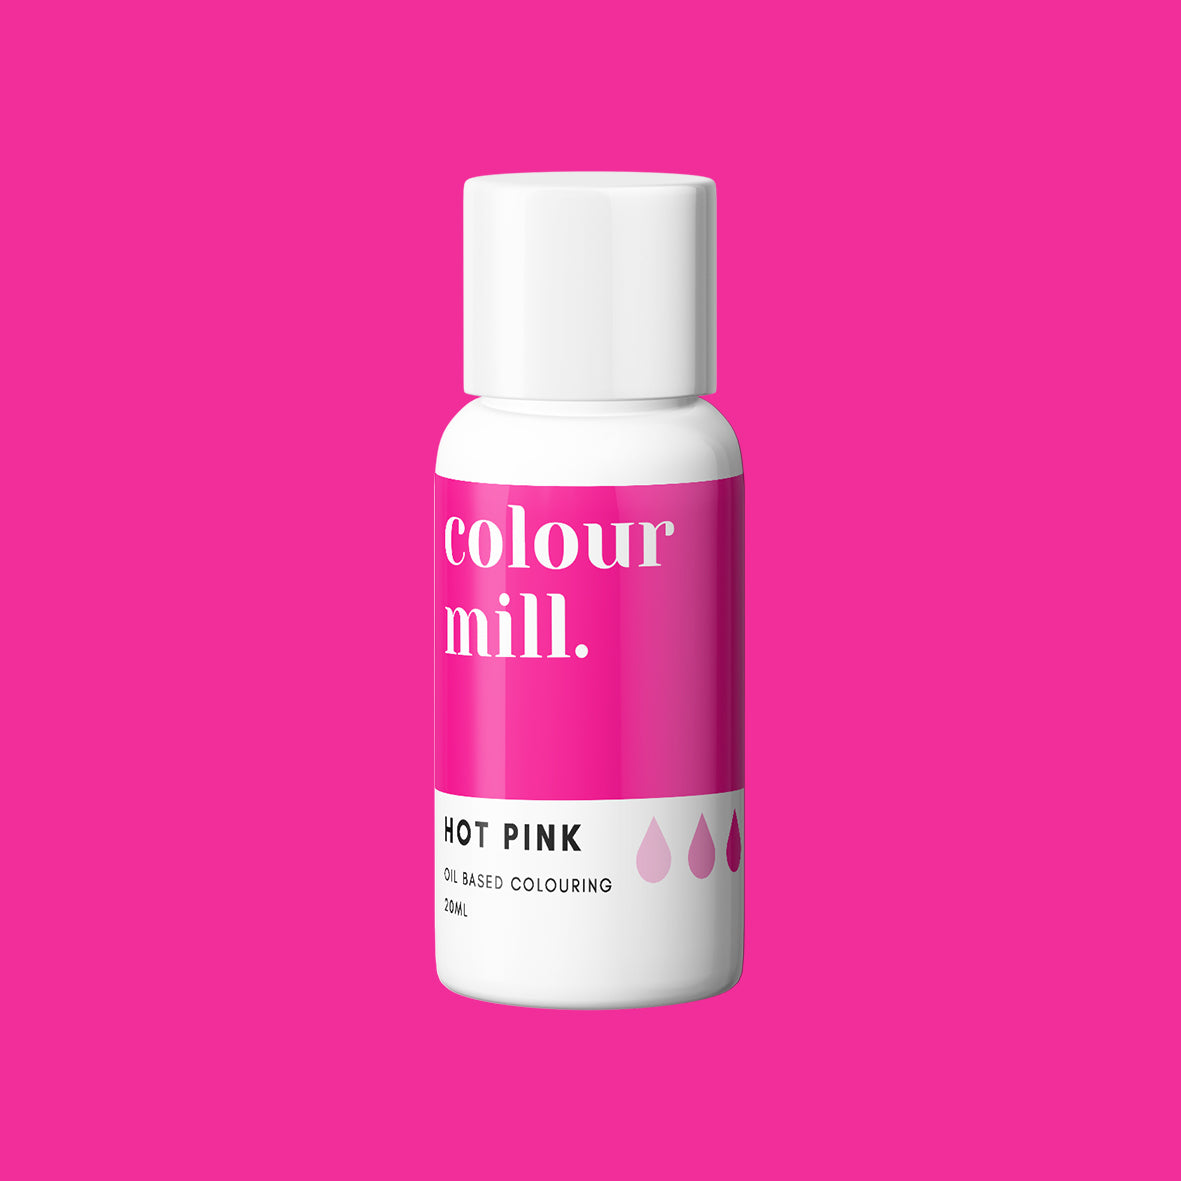 HOT PINK oil based concentrated icing colouring 20ml